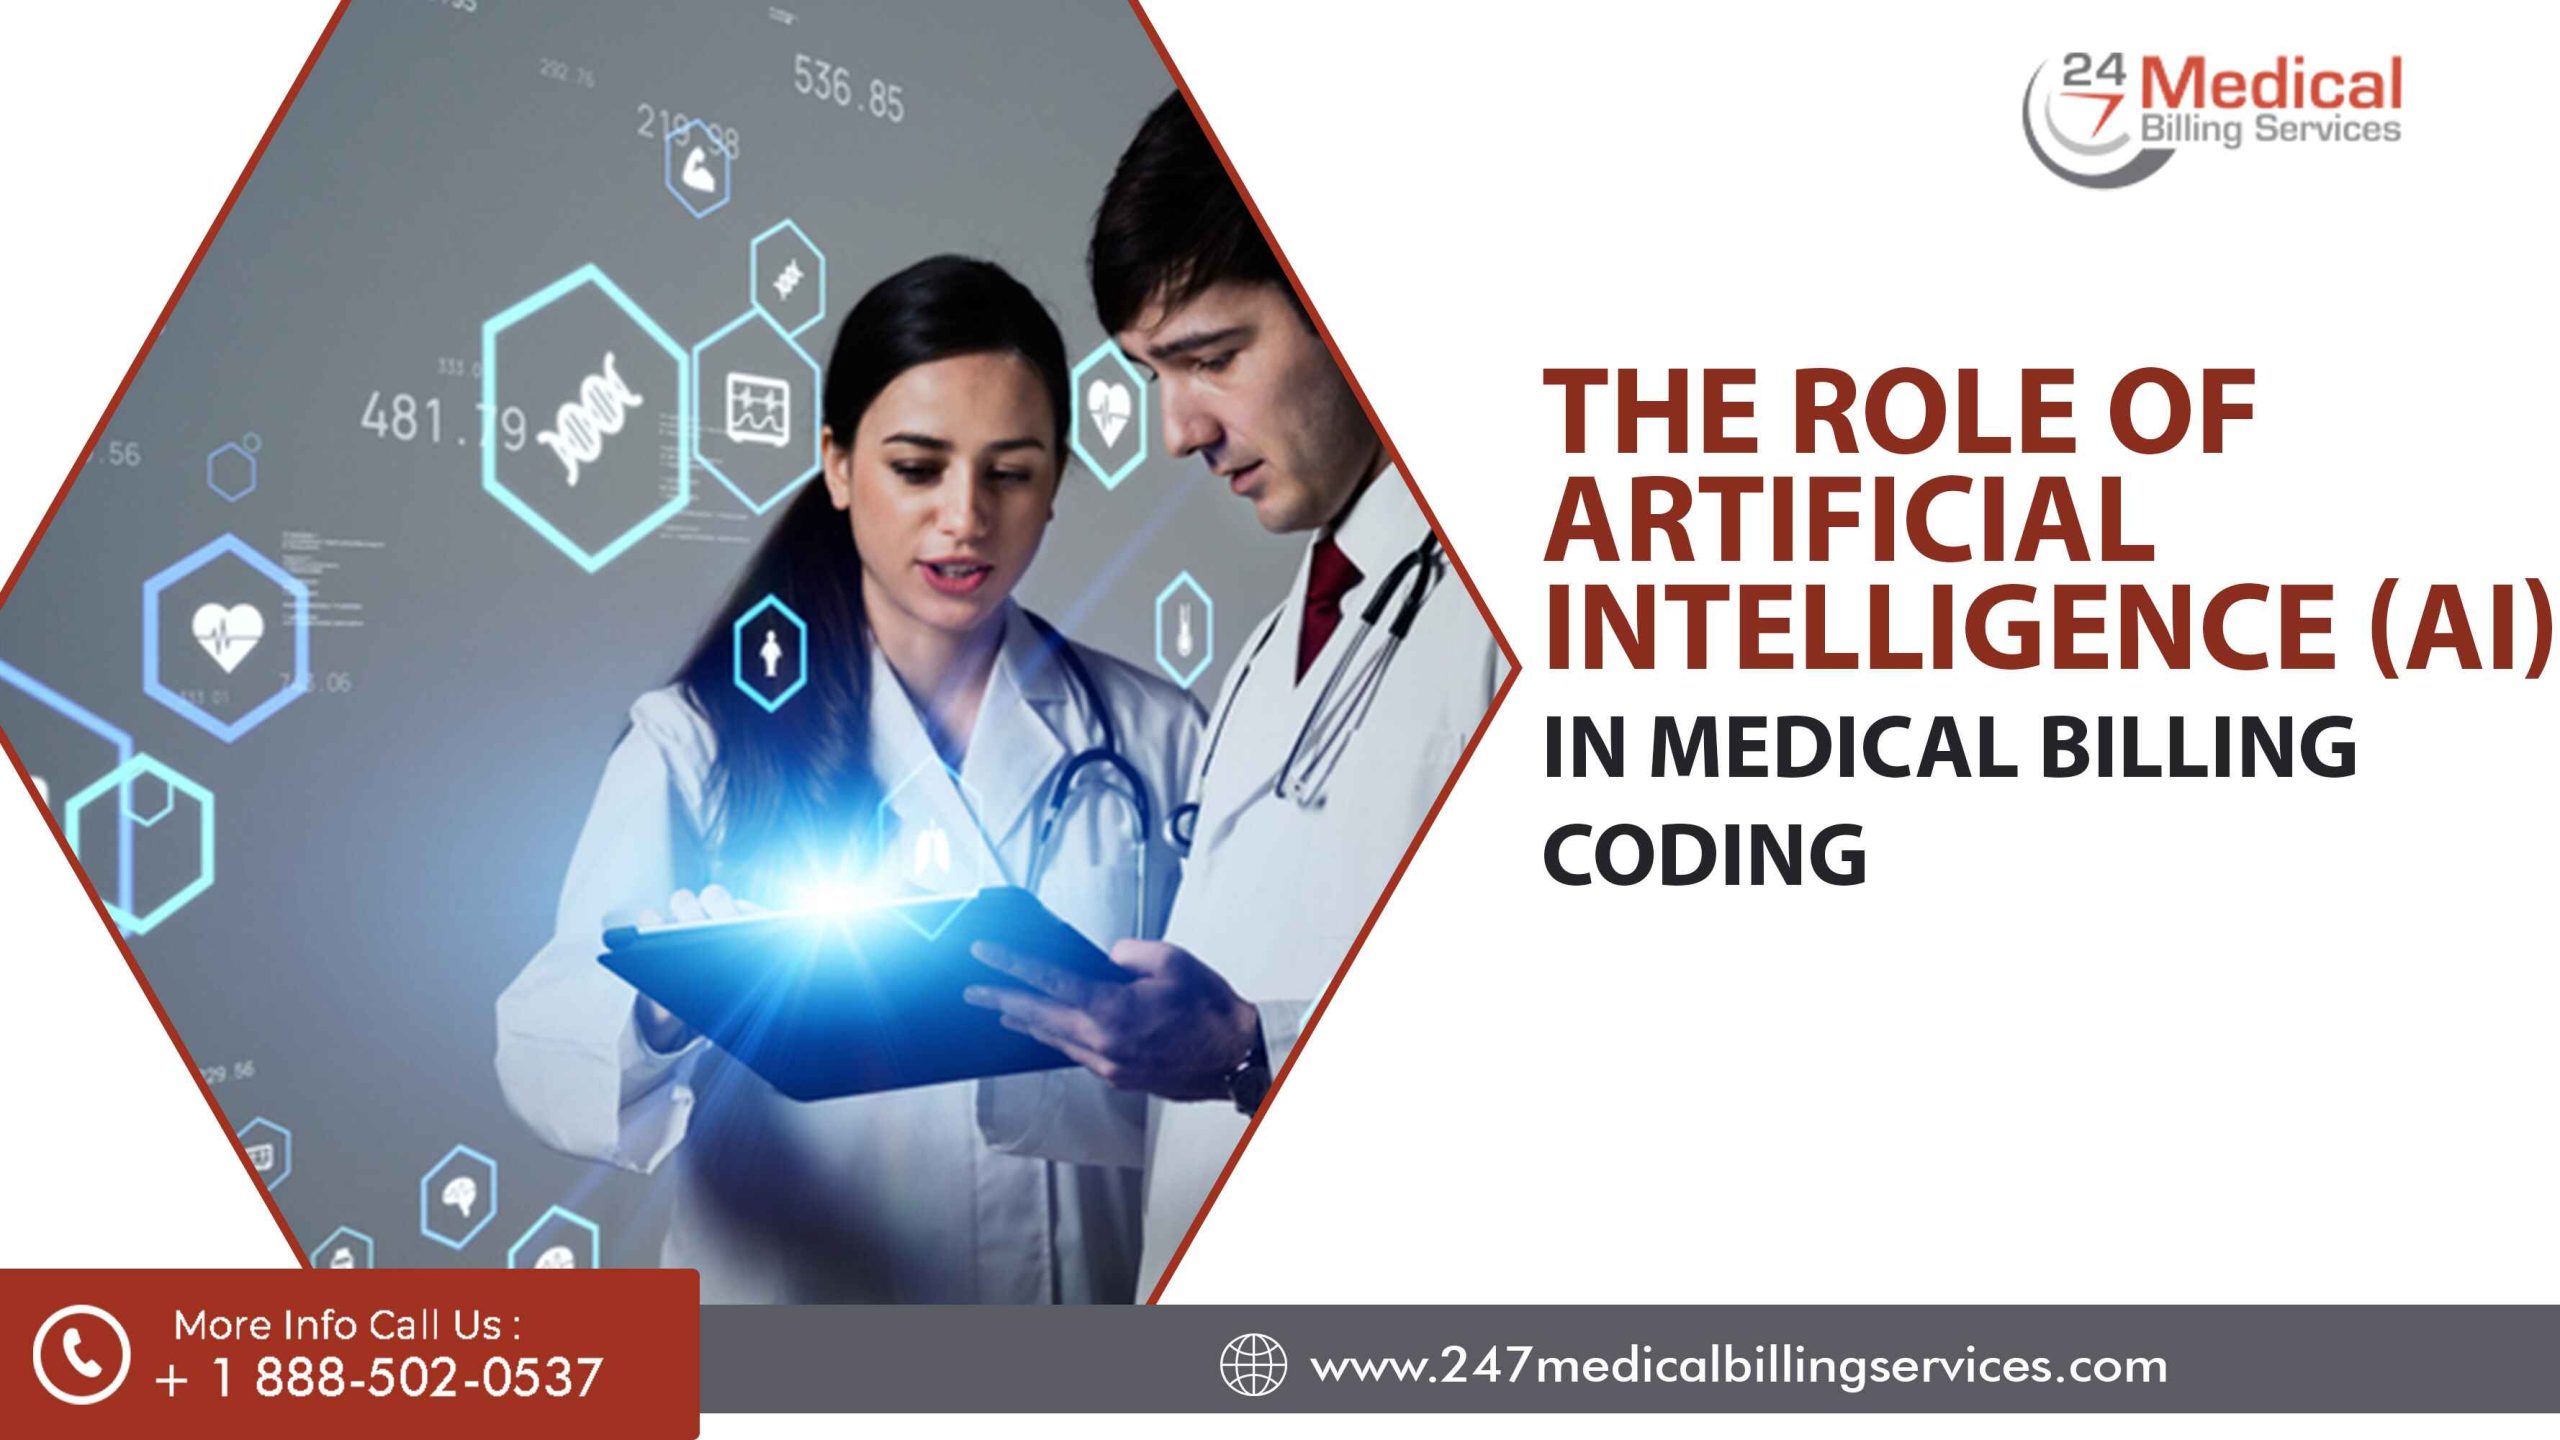  The Role of Artificial Intelligence (AI) in Medical Billing Coding